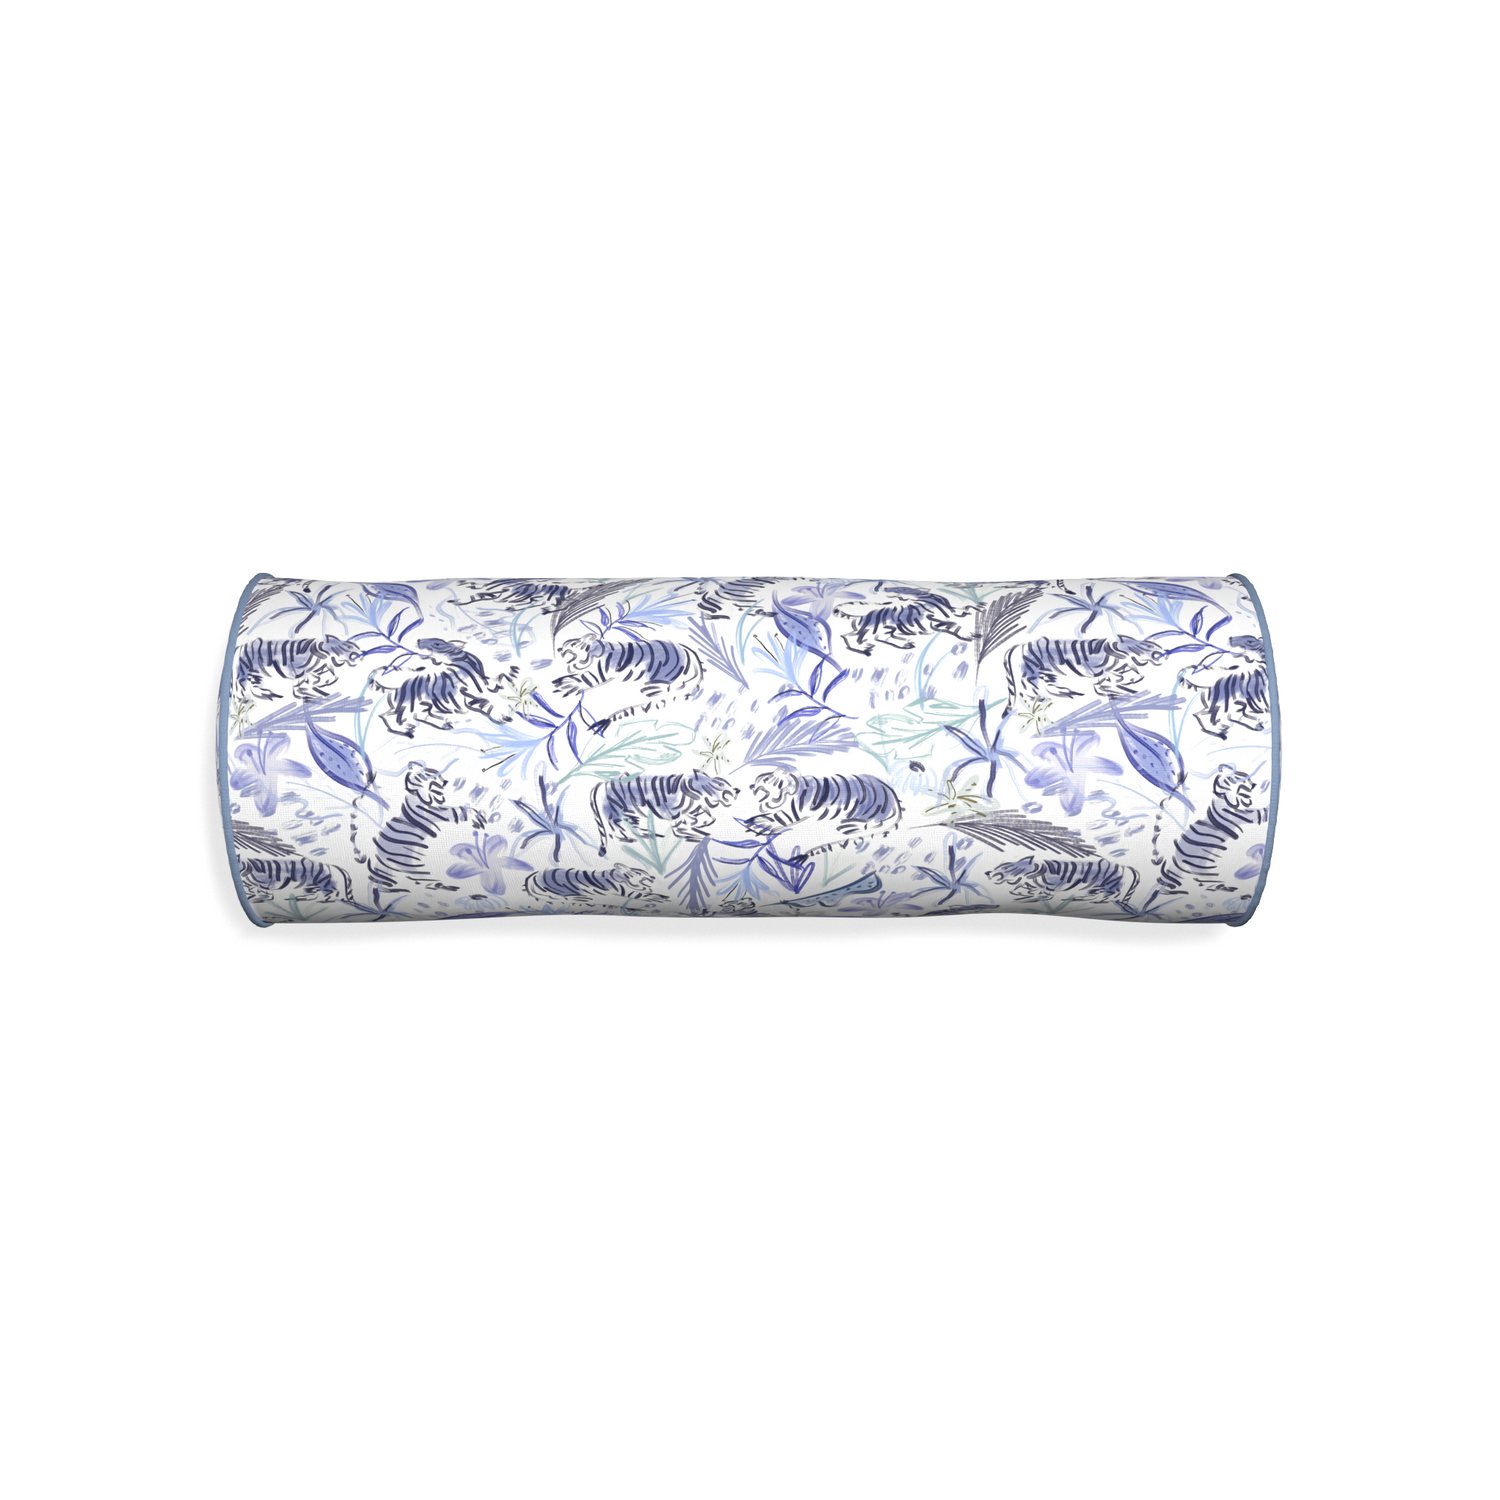 Bolster frida blue custom blue with intricate tiger designpillow with sky piping on white background